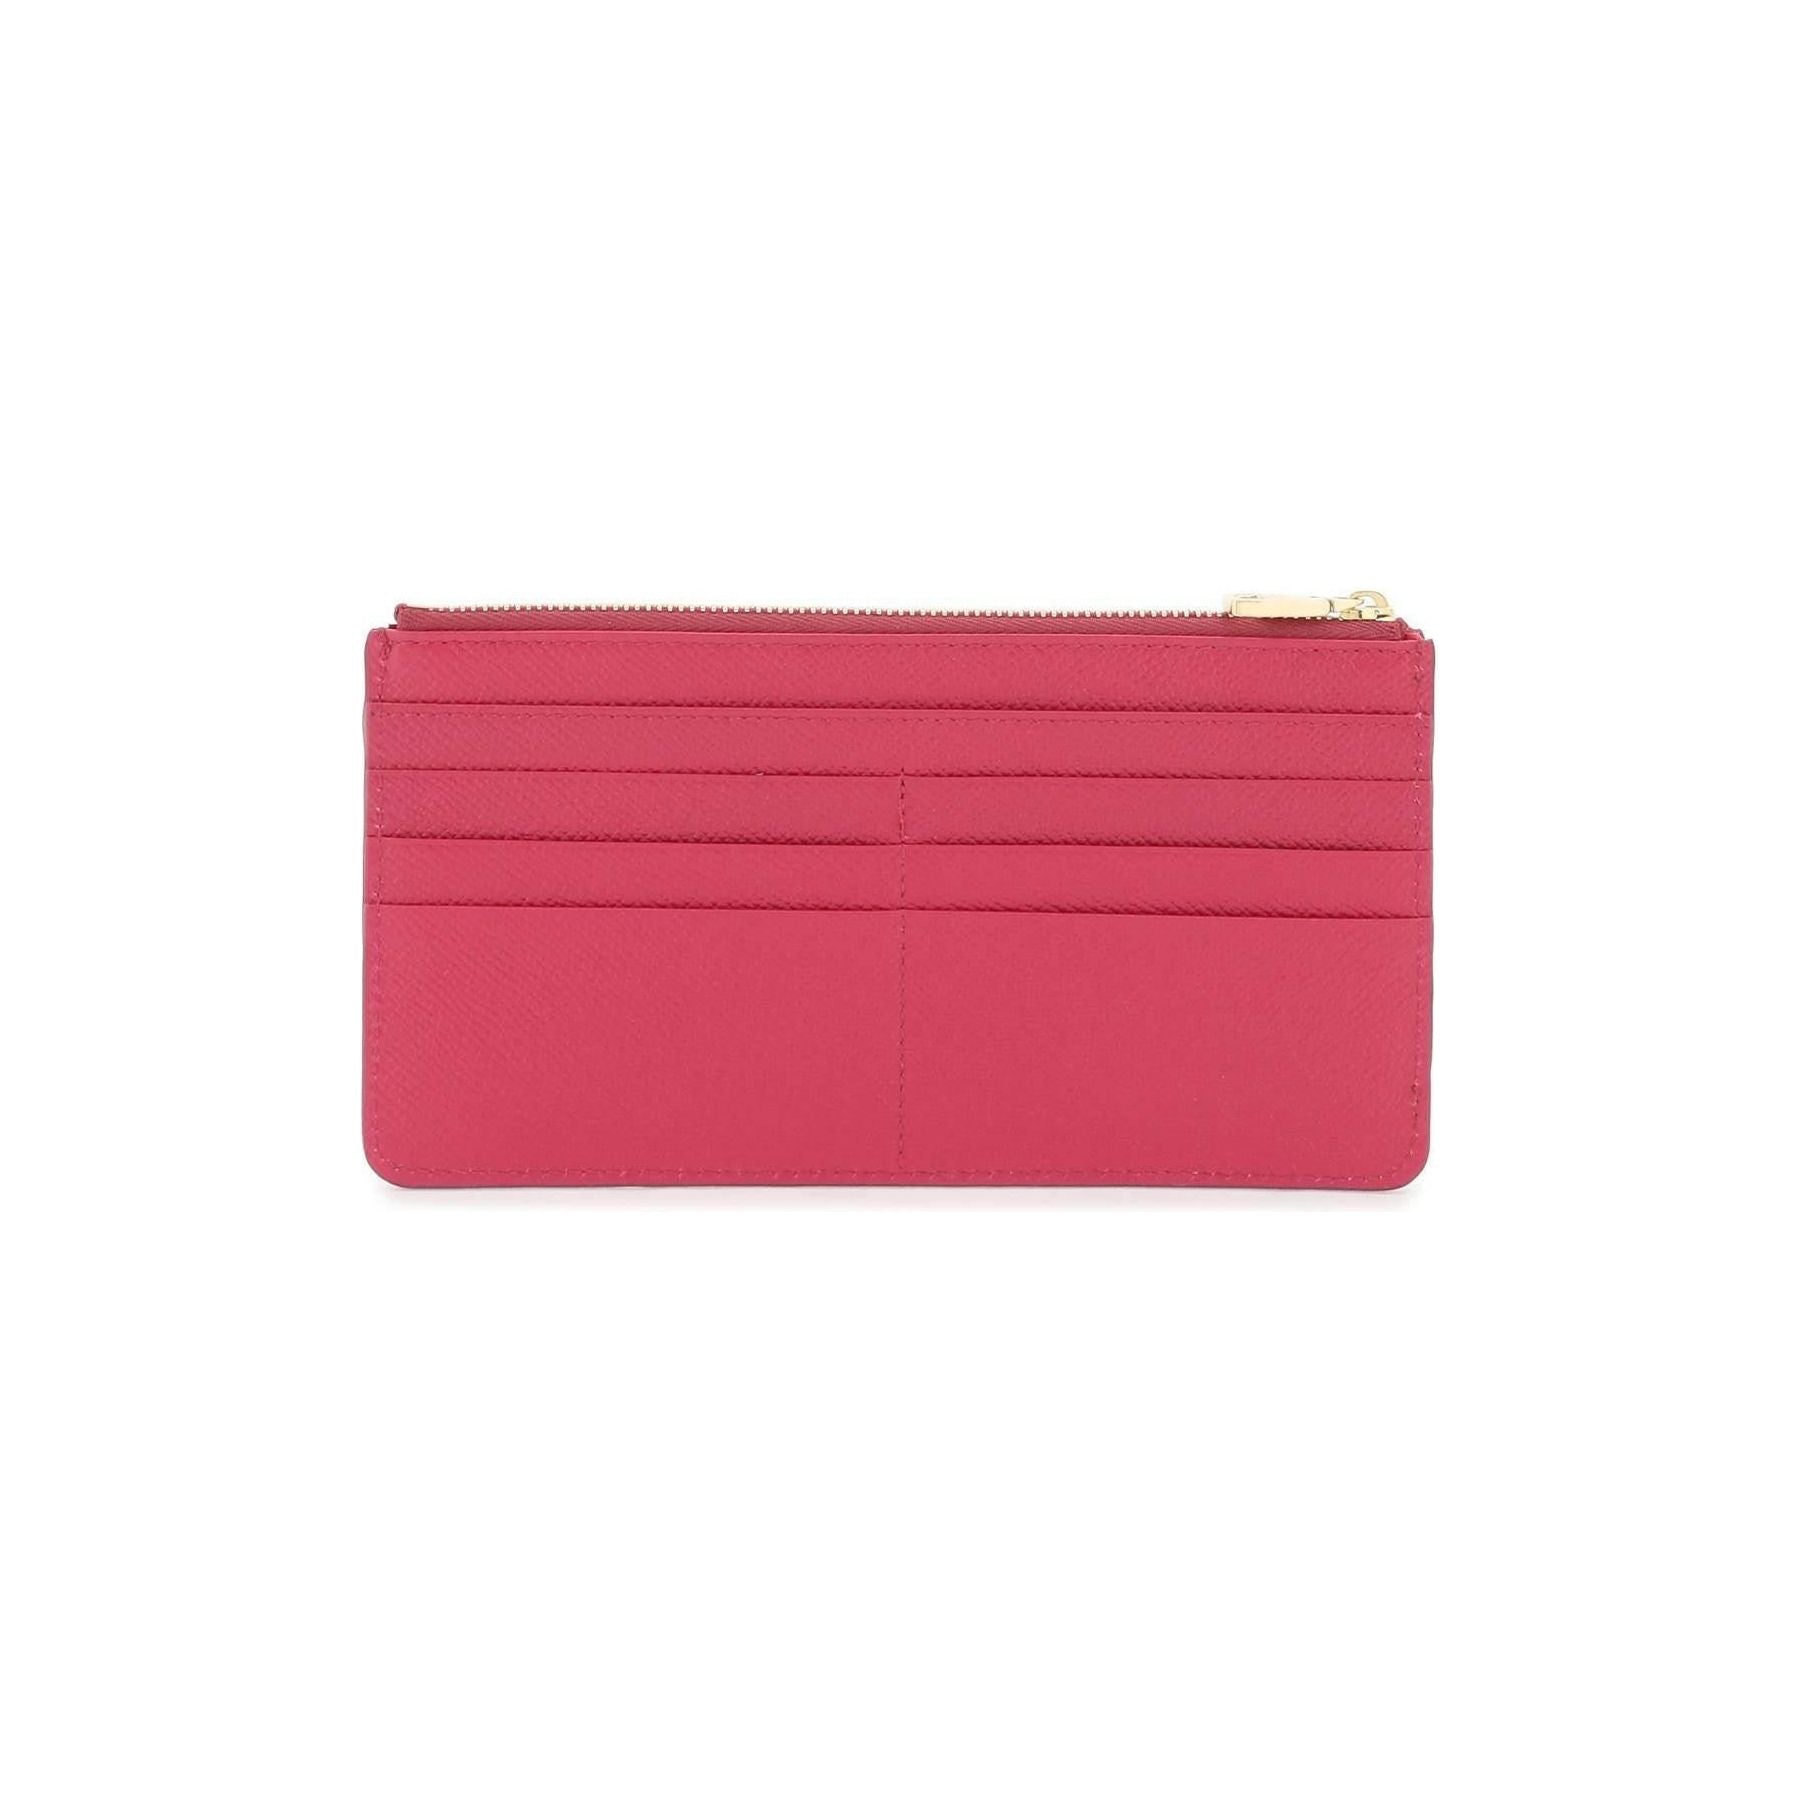 Bright Pink Dauphine Leather Zippered Cardholder Pouch DOLCE & GABBANA JOHN JULIA.